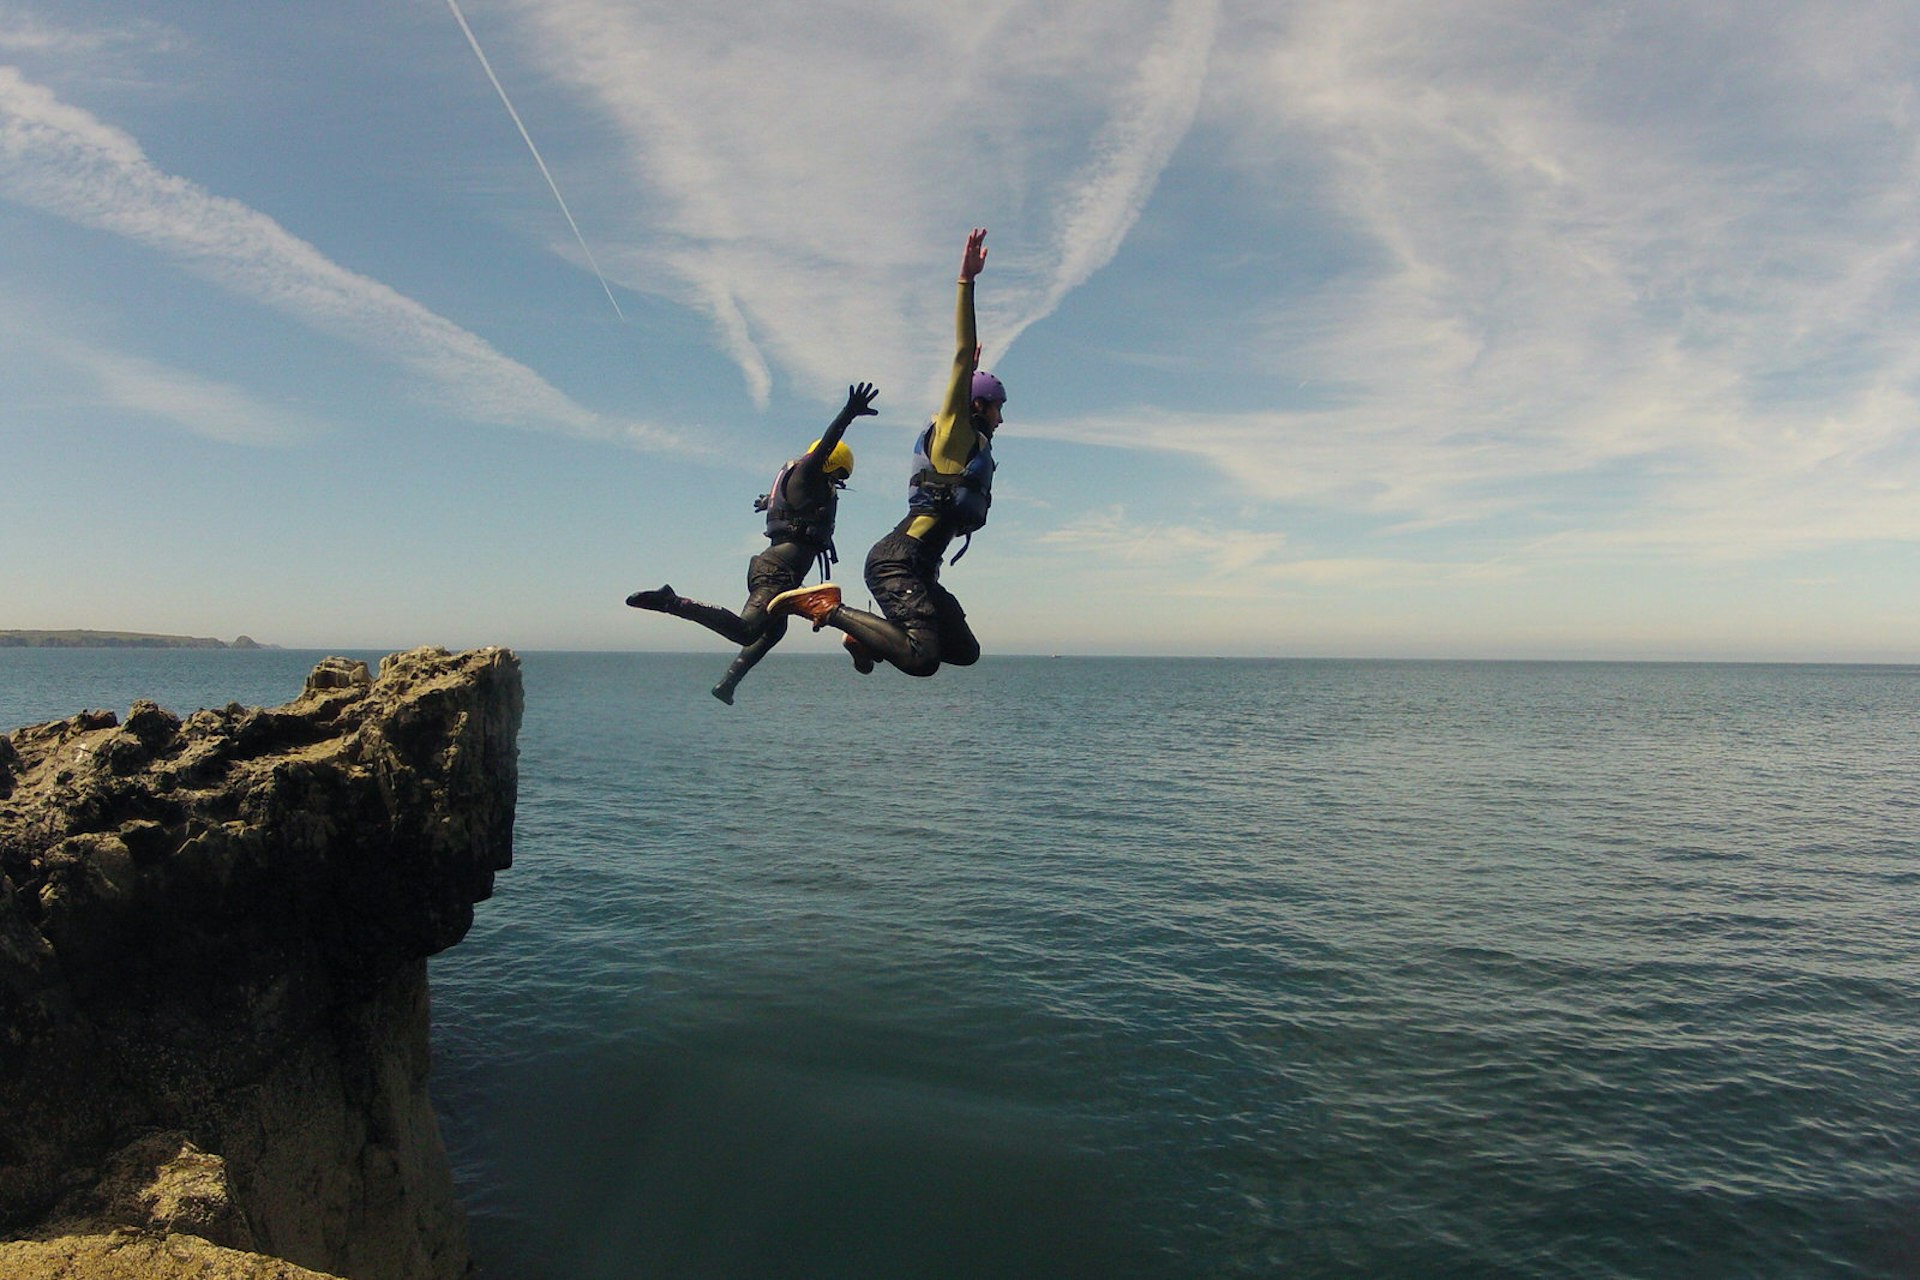 Coasteering encourages close engagement with sea and shore as well as big leaps © Preseli Venture